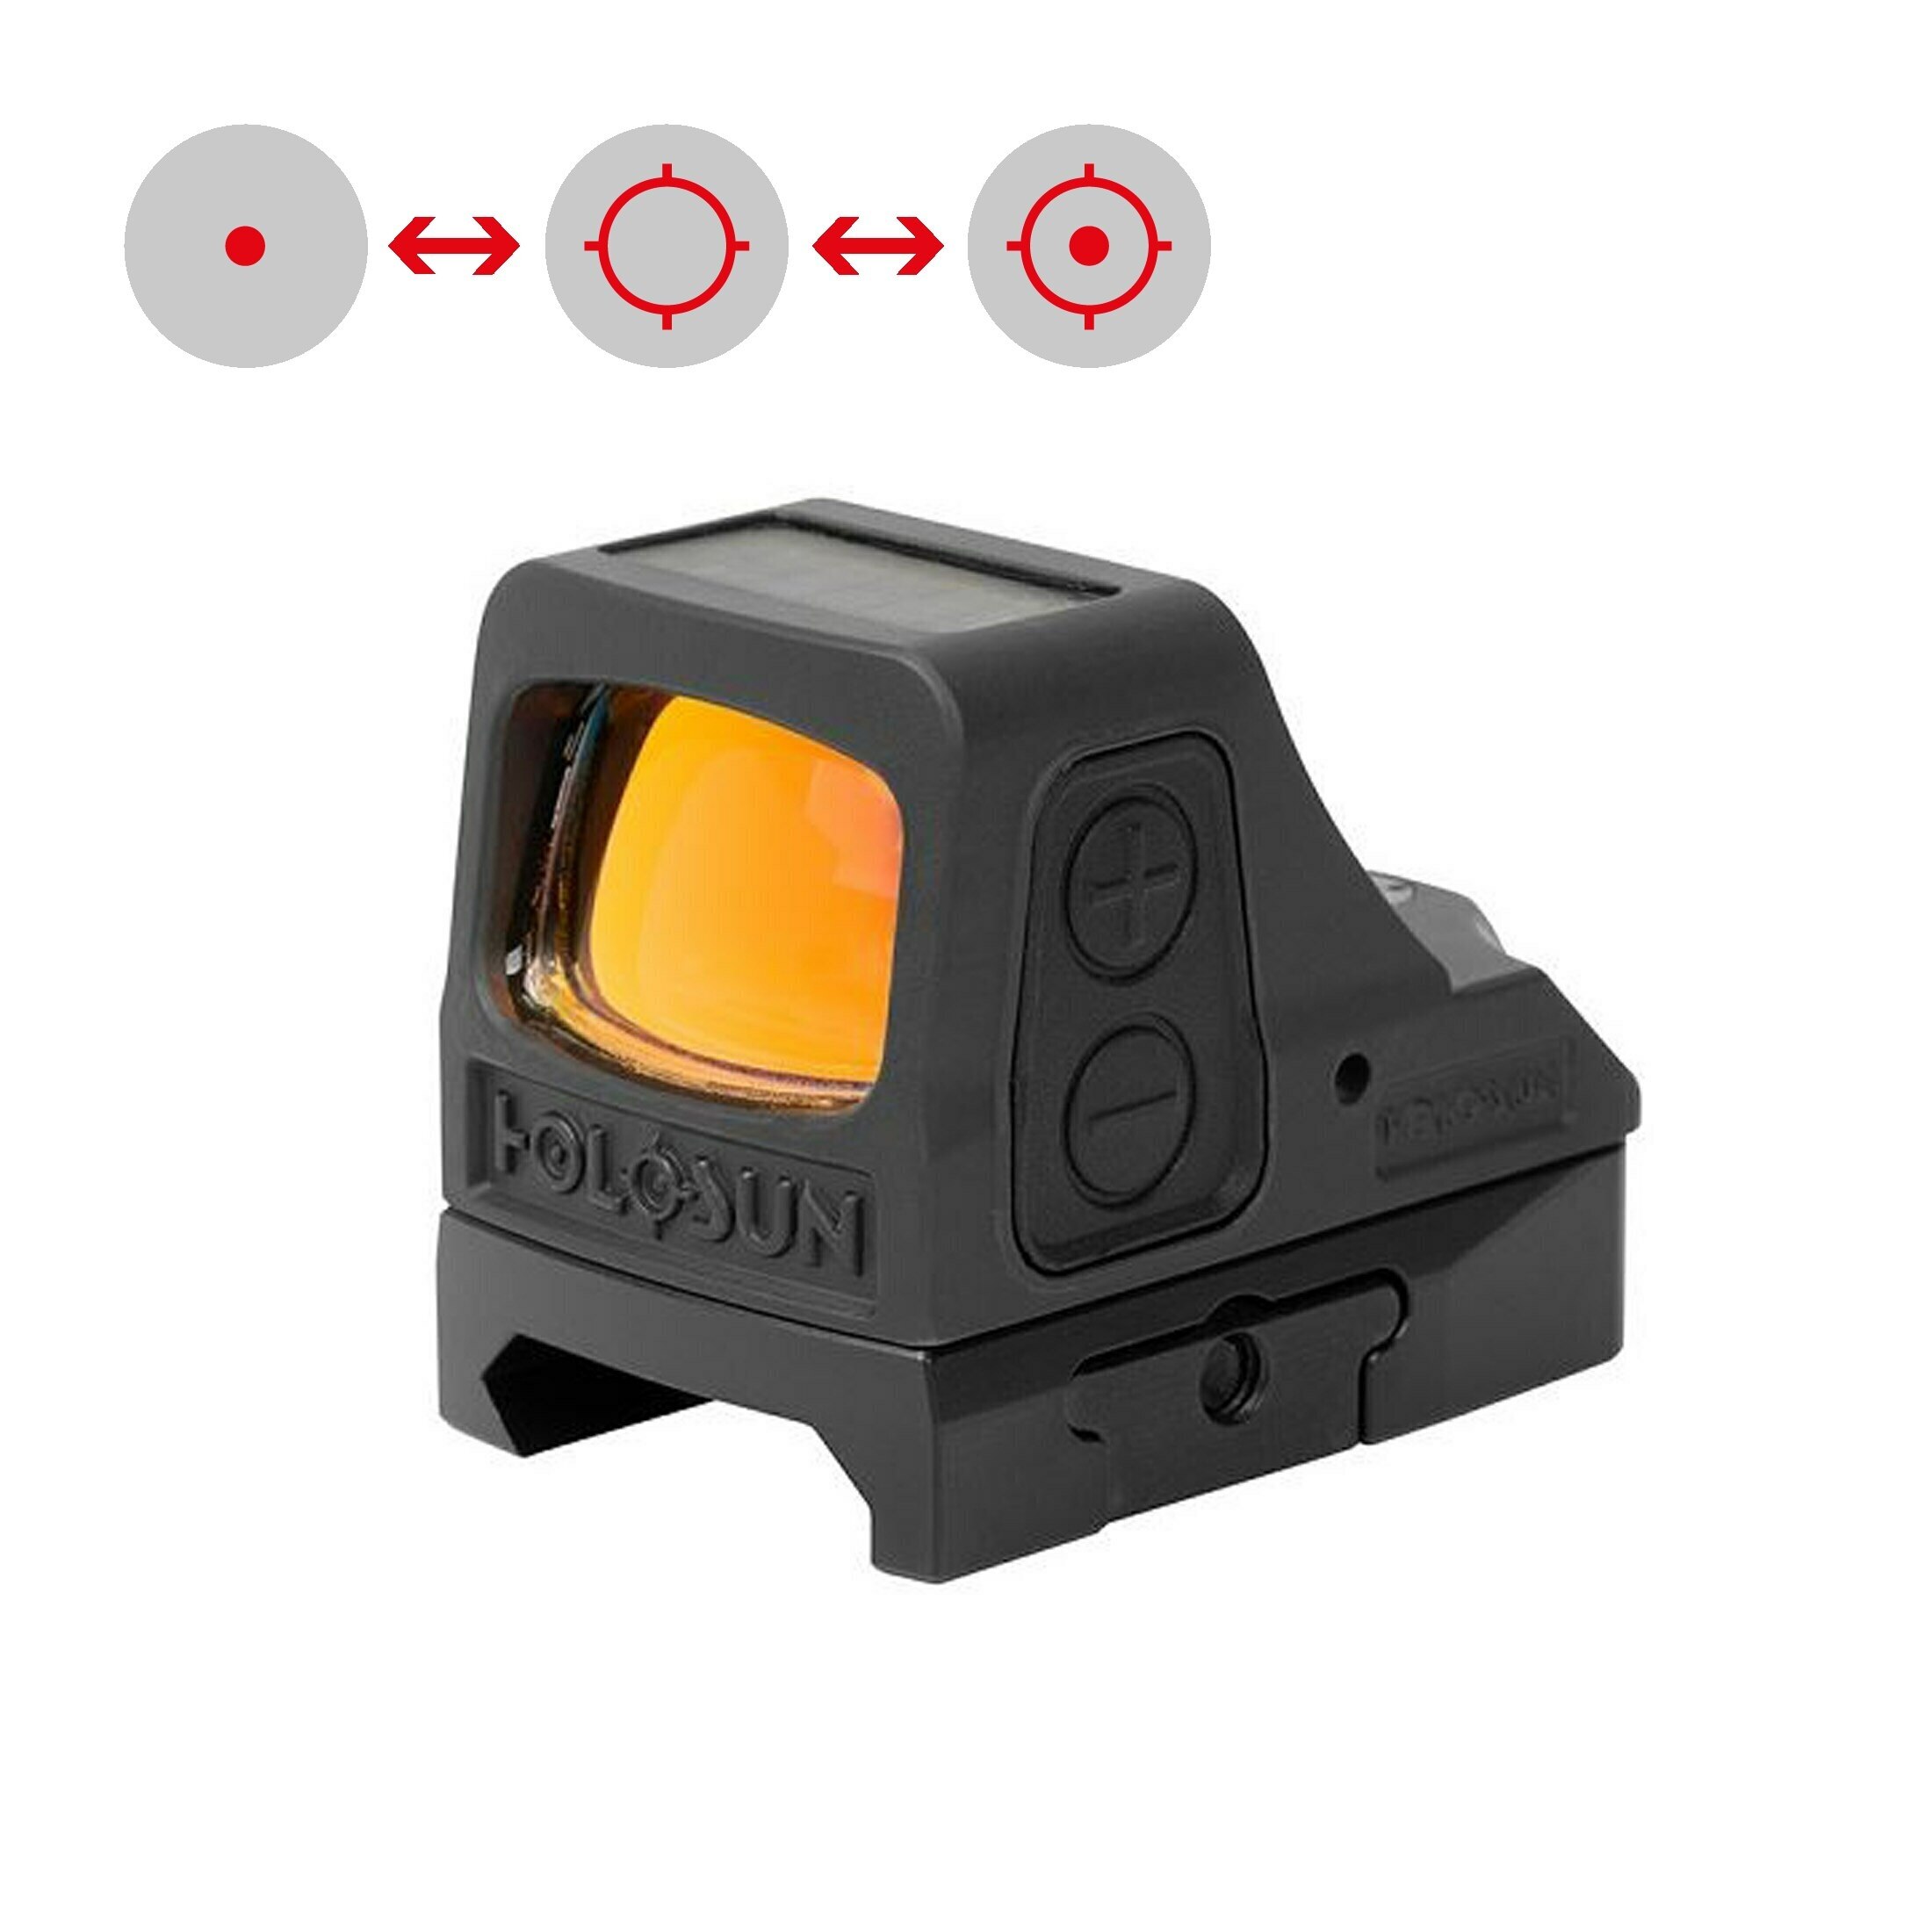 Holosun Open Reflex Red Dot Sight HE508T-RD-V2 with switchable reticle and titanium housing